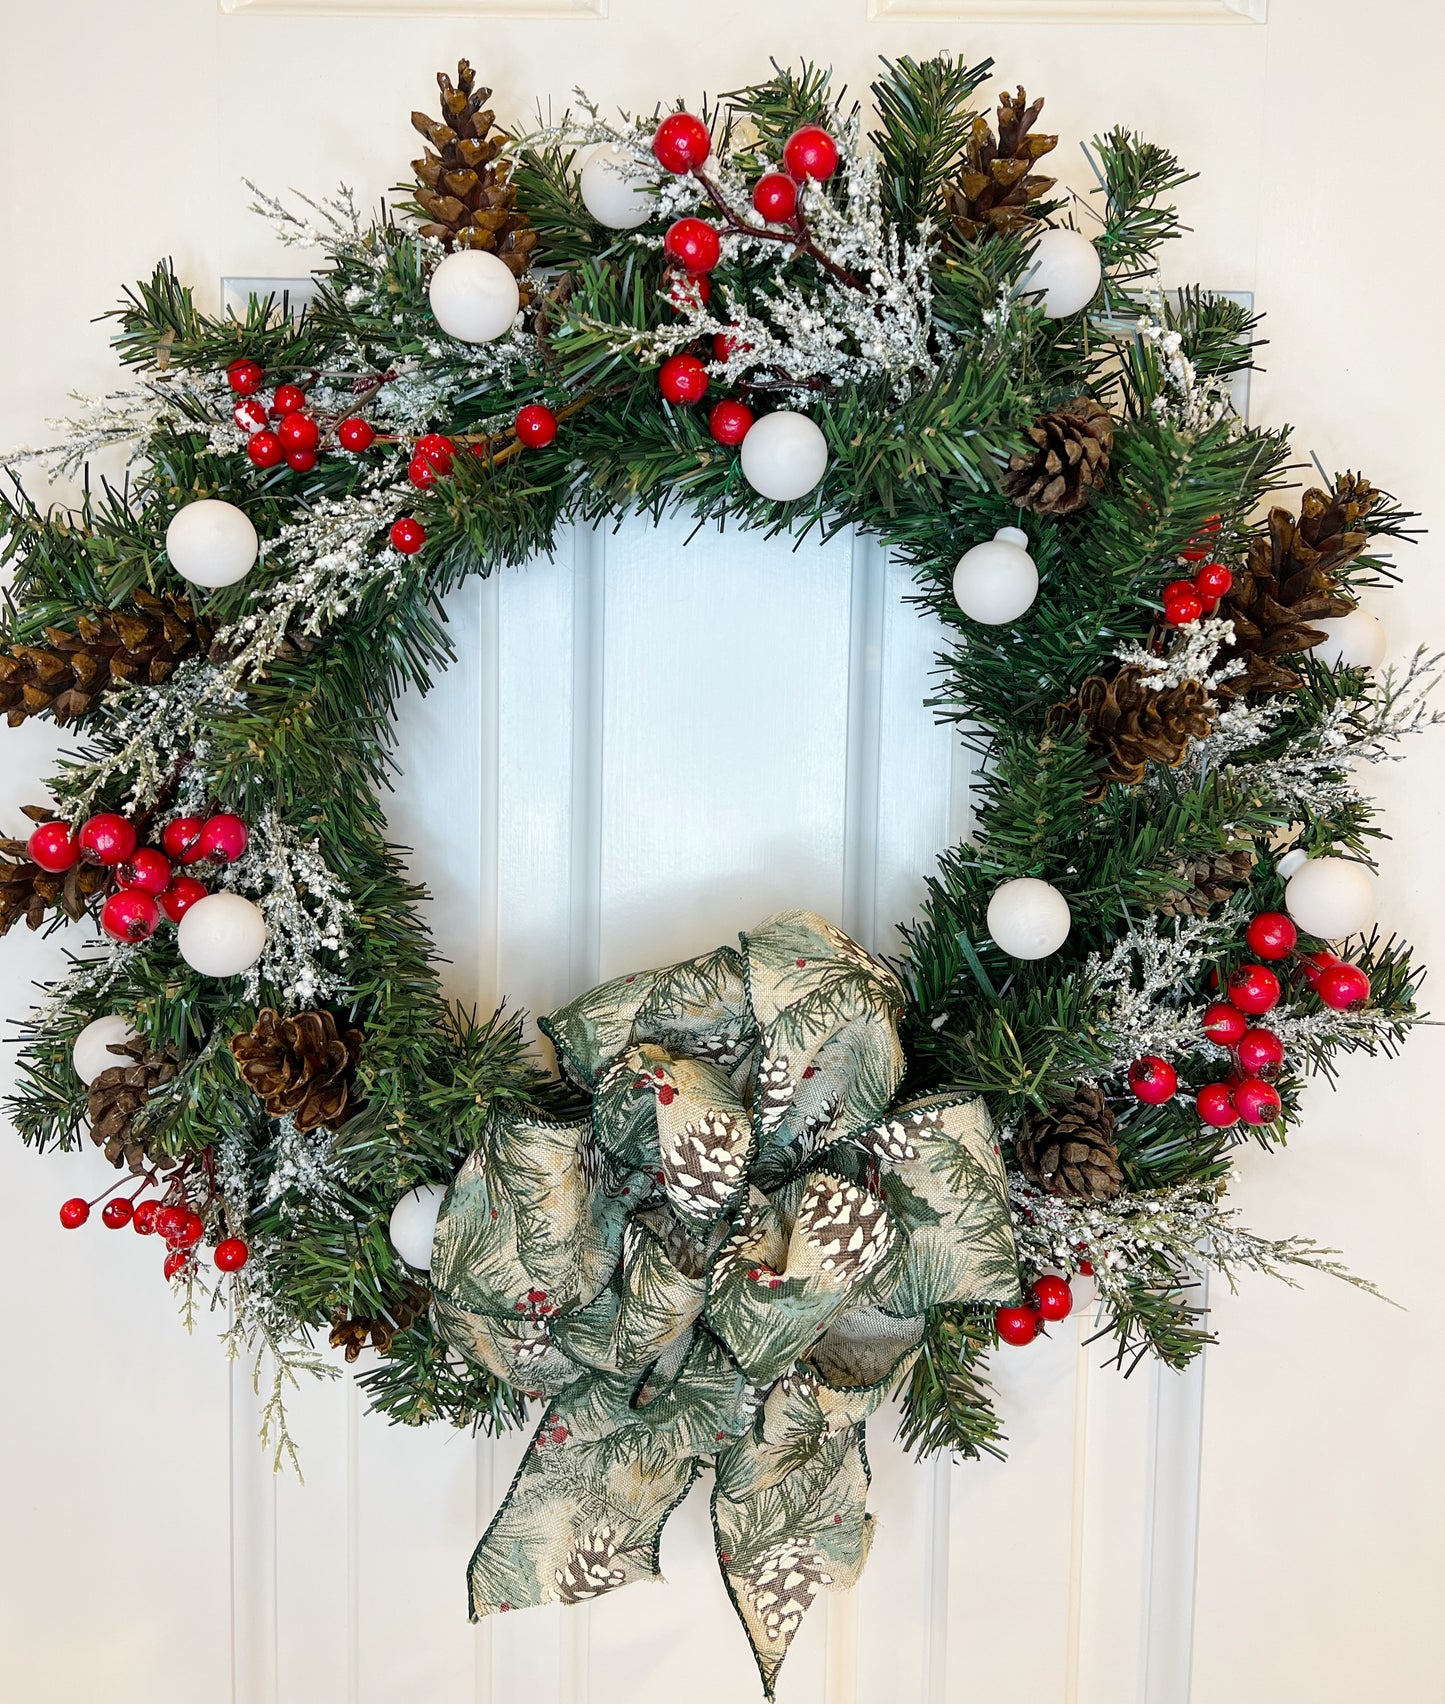 16" Holiday Wreath with Pinecones & Berries